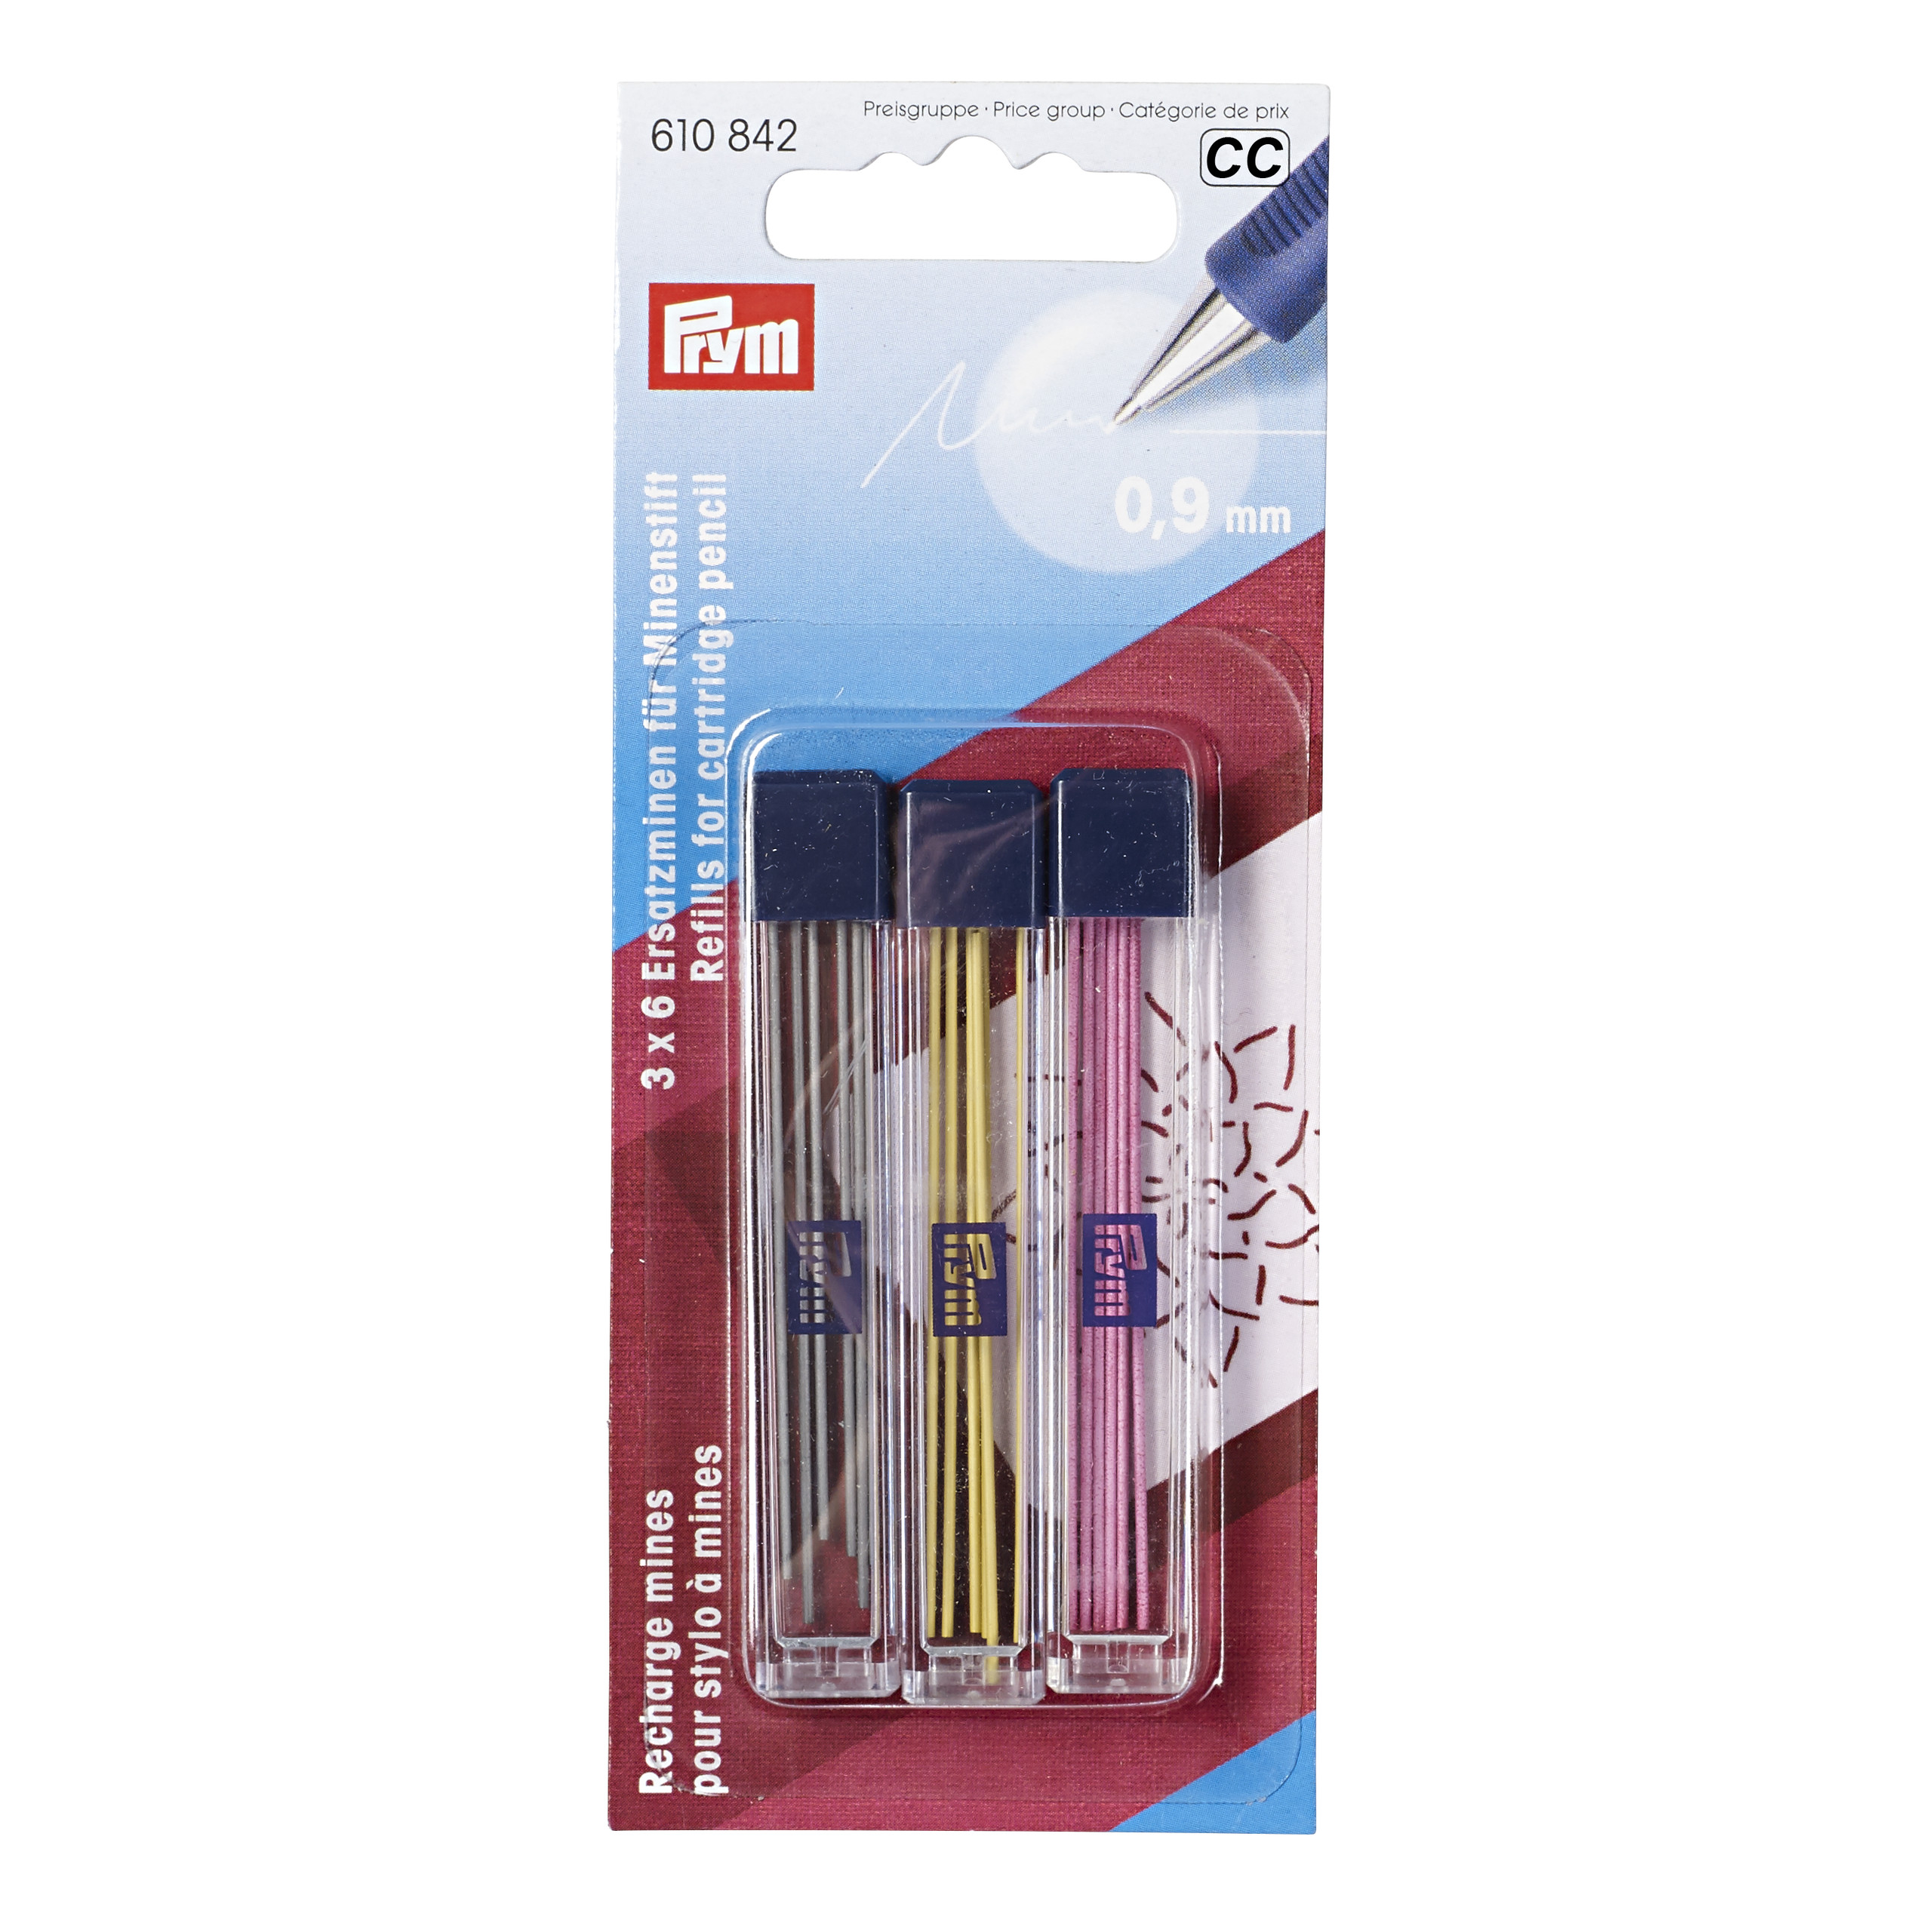 Refills for cartridge pencil yellow/black/pink, 18 St